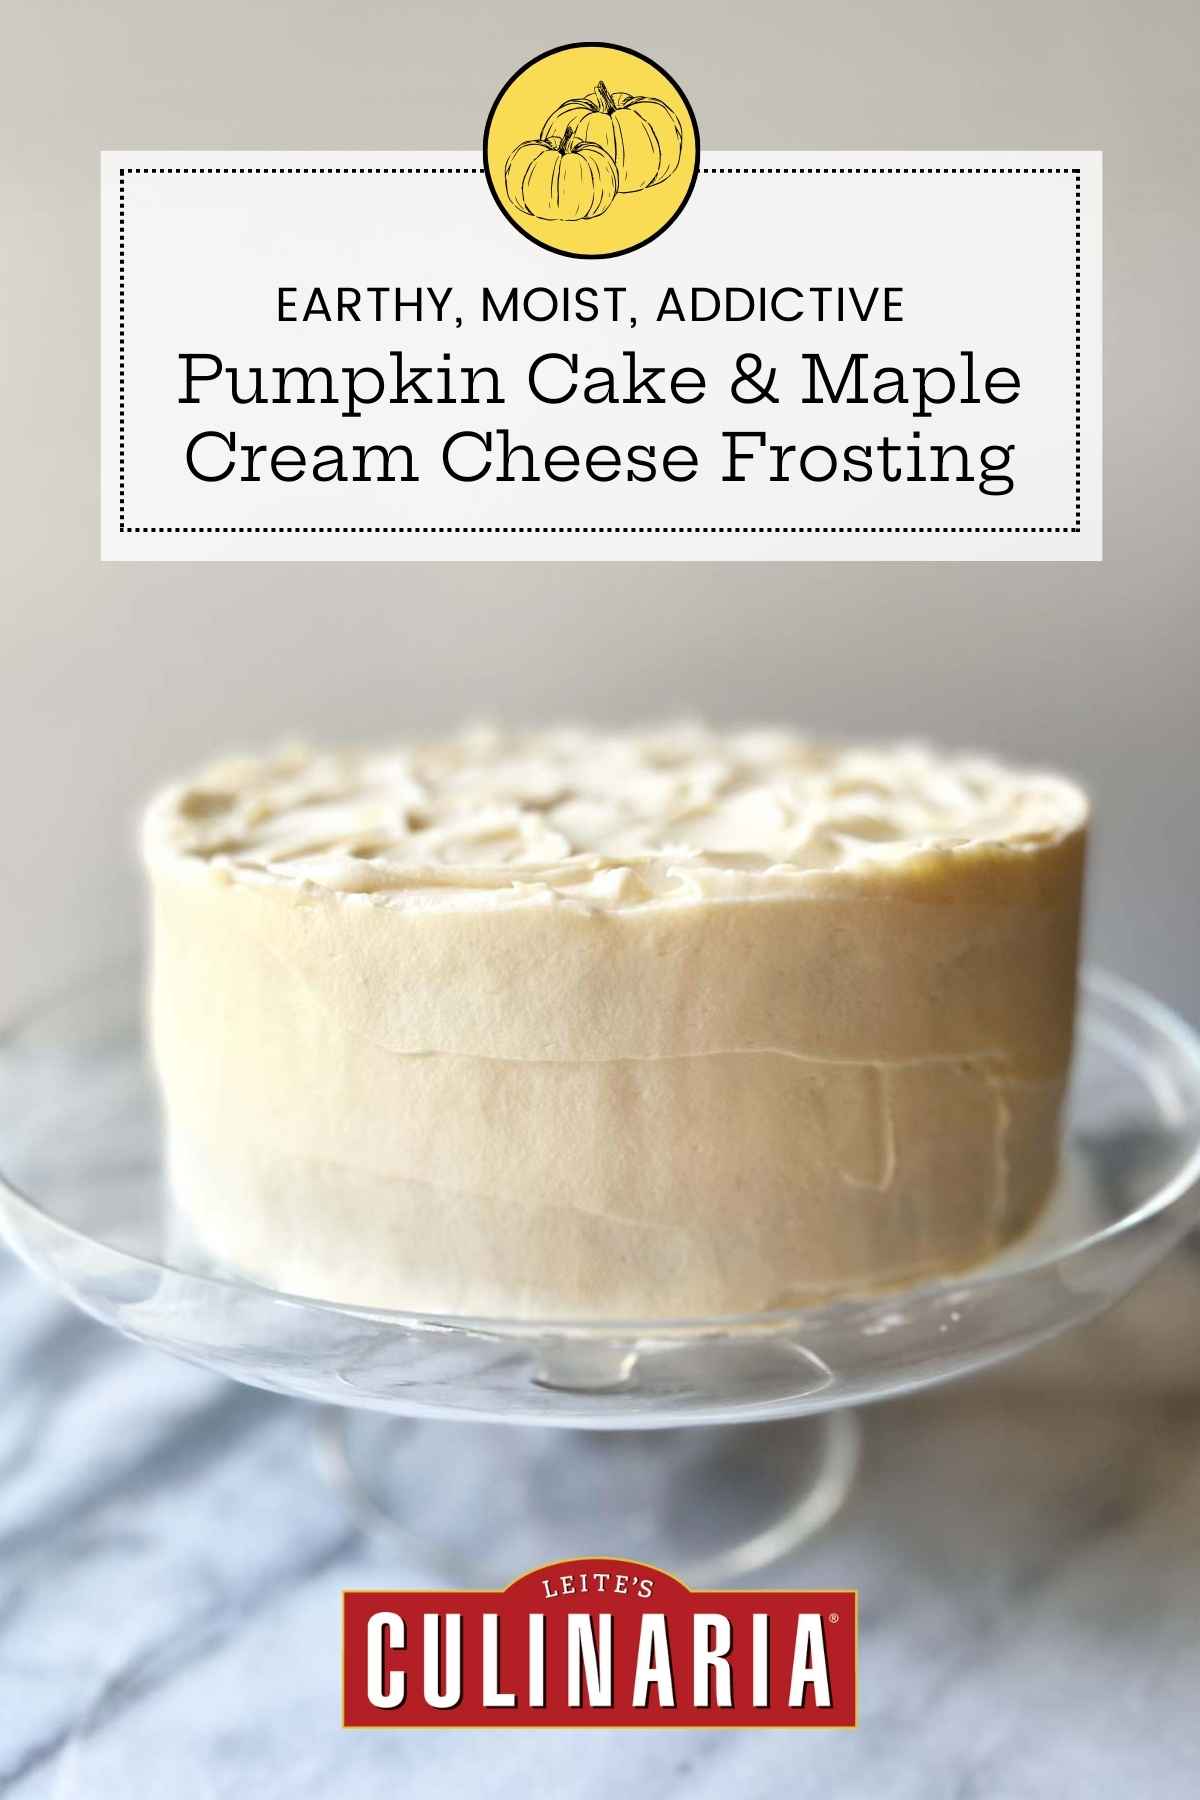 A pumpkin cake with maple-cream cheese frosting on a cake stand.